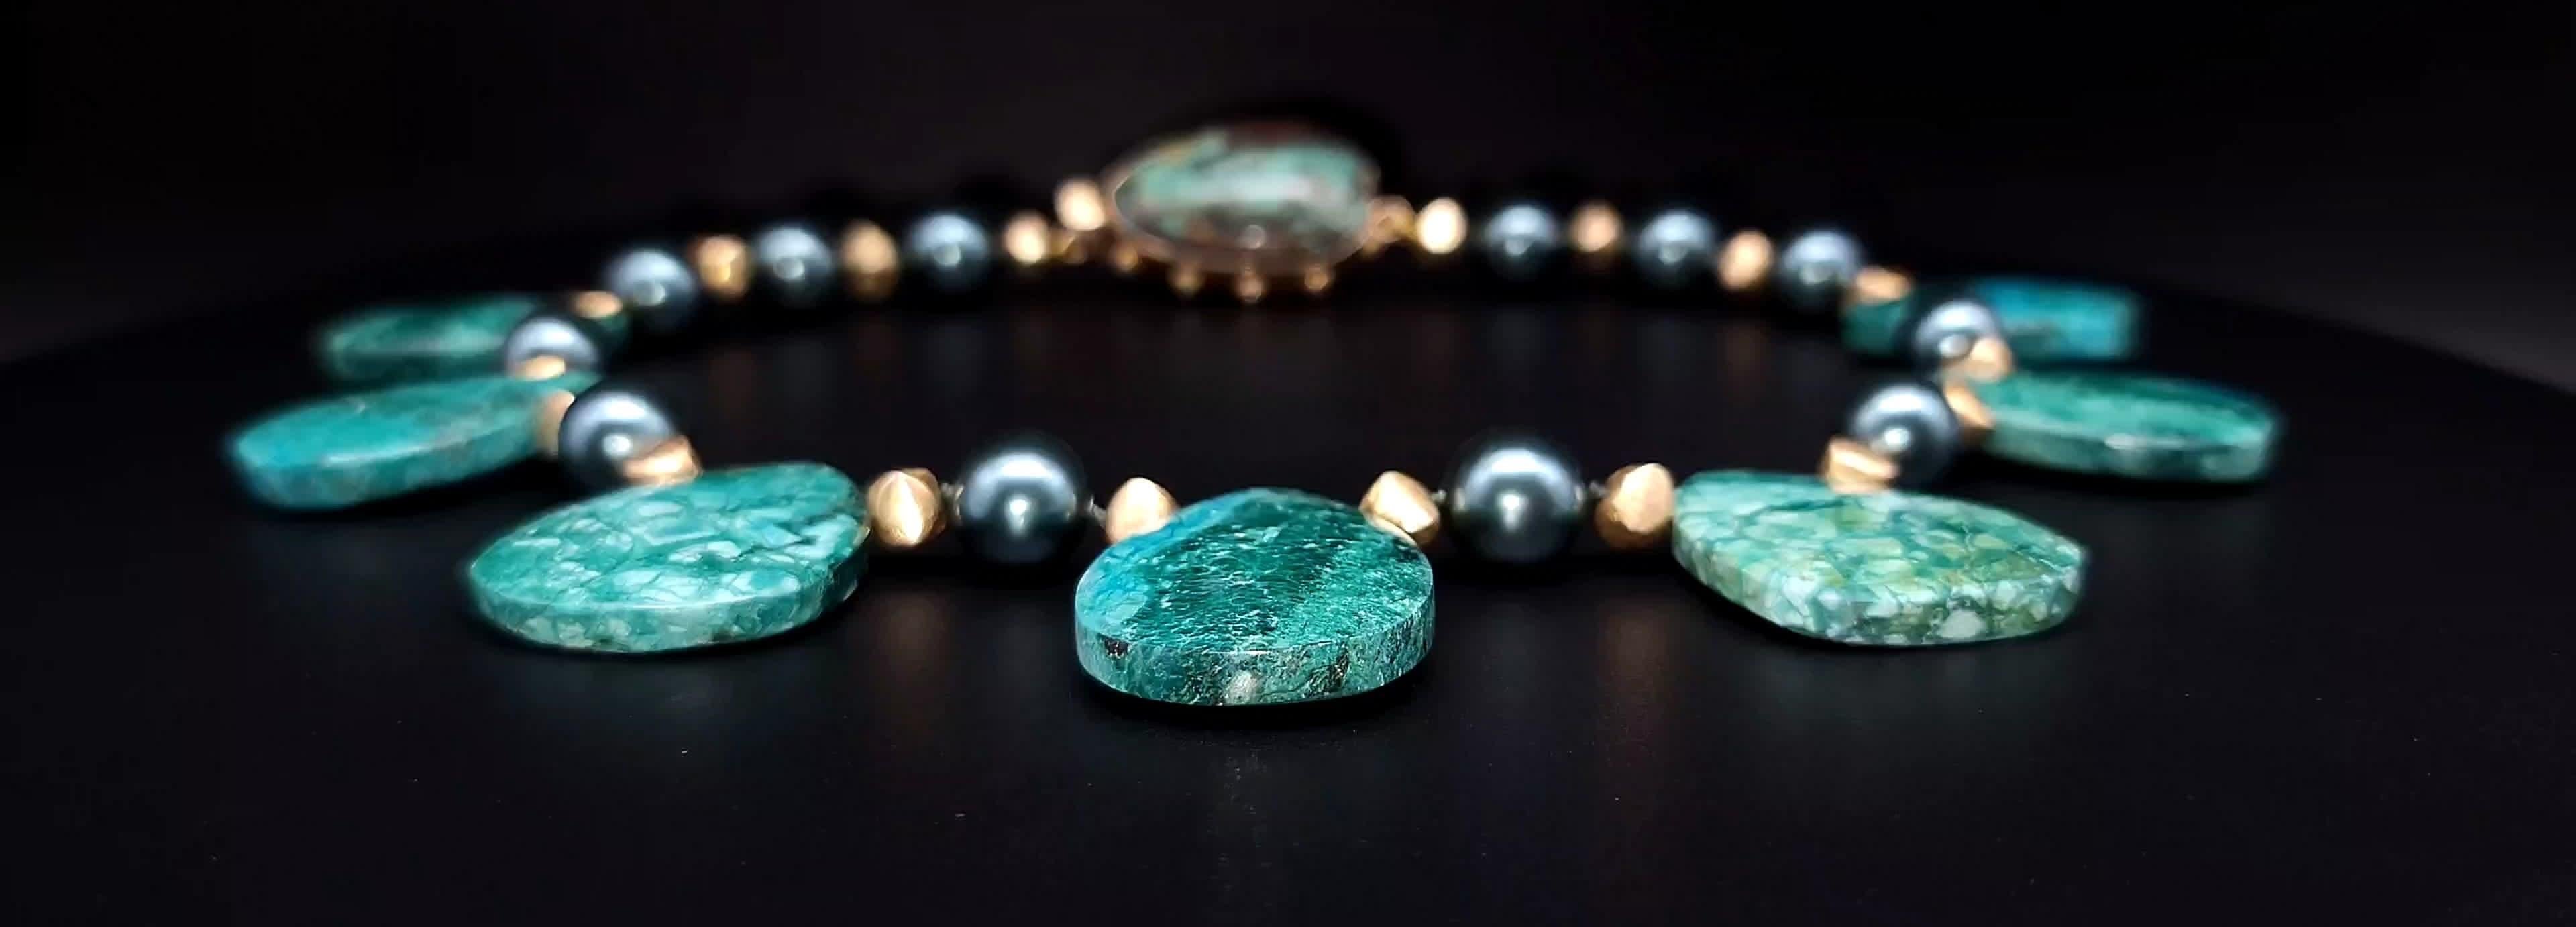 A.Jeschel Masterpiece Oval Chrysocolla plates necklace For Sale 1